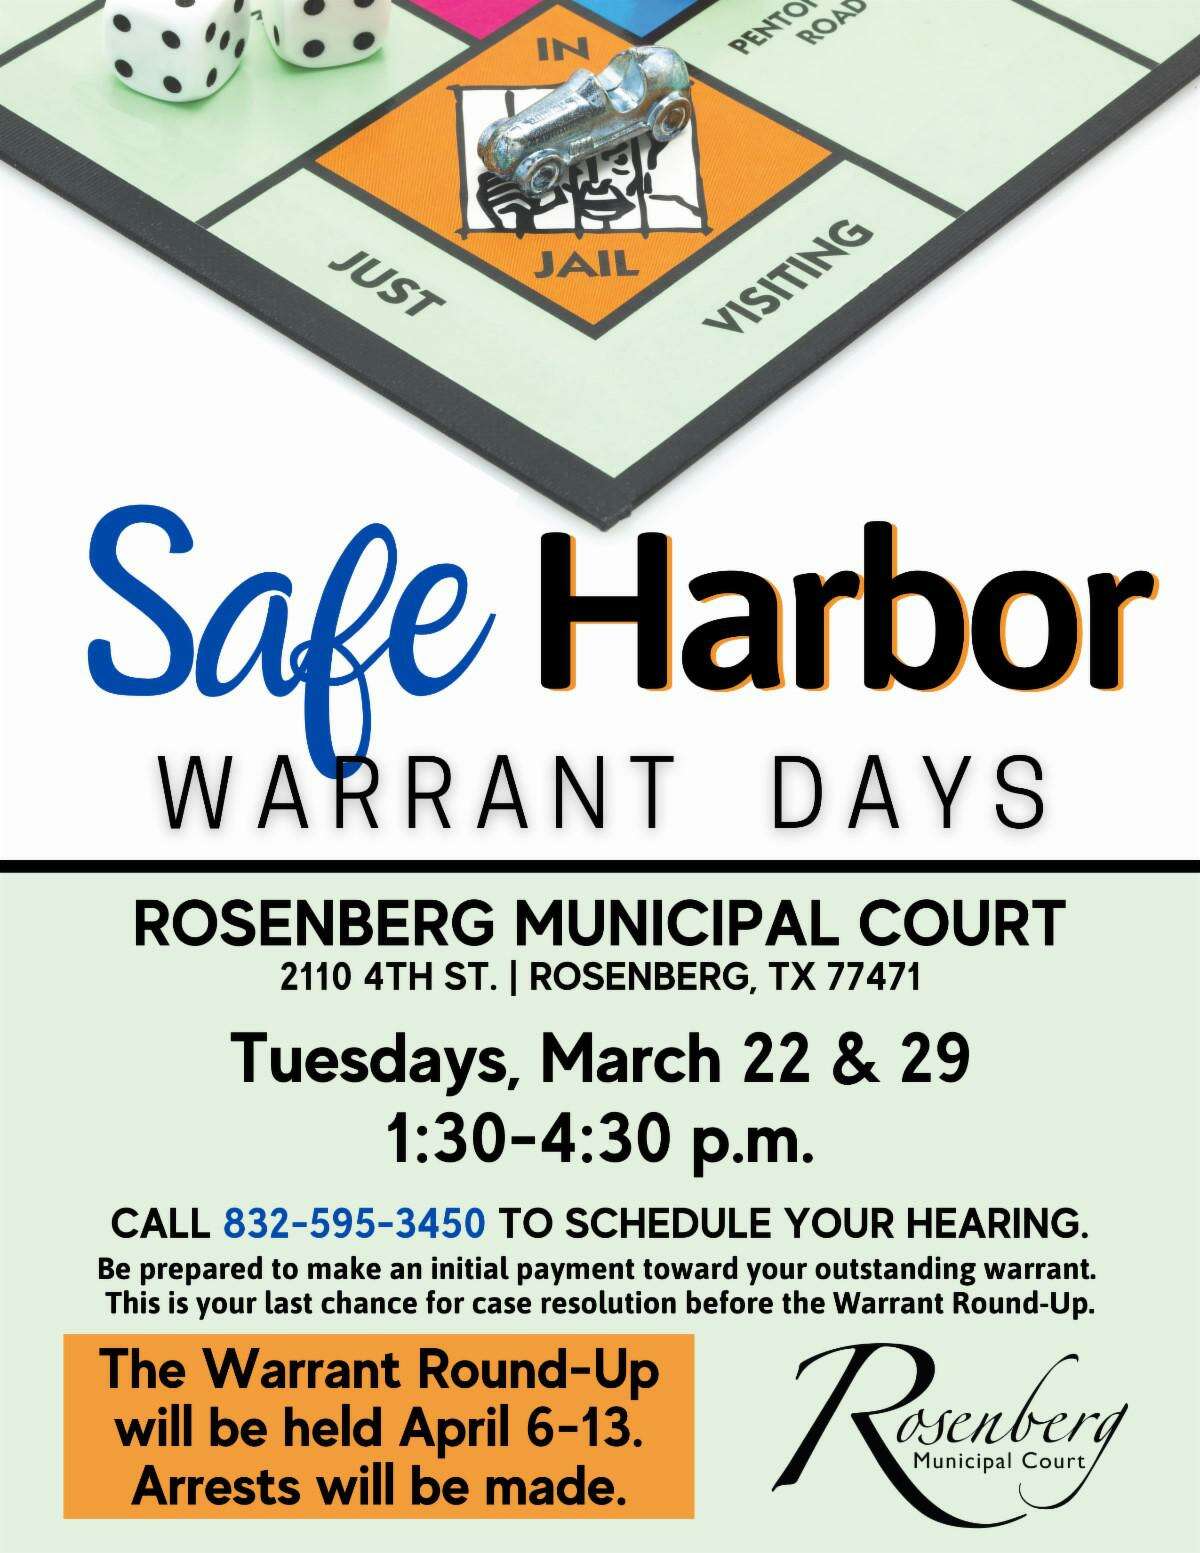 People with outstanding warrants in Rosenberg can settle them during the city’s Safe Harbor Warrant Days on March 22 or 29 to avoid arrest during Warrant Round-Up in April.